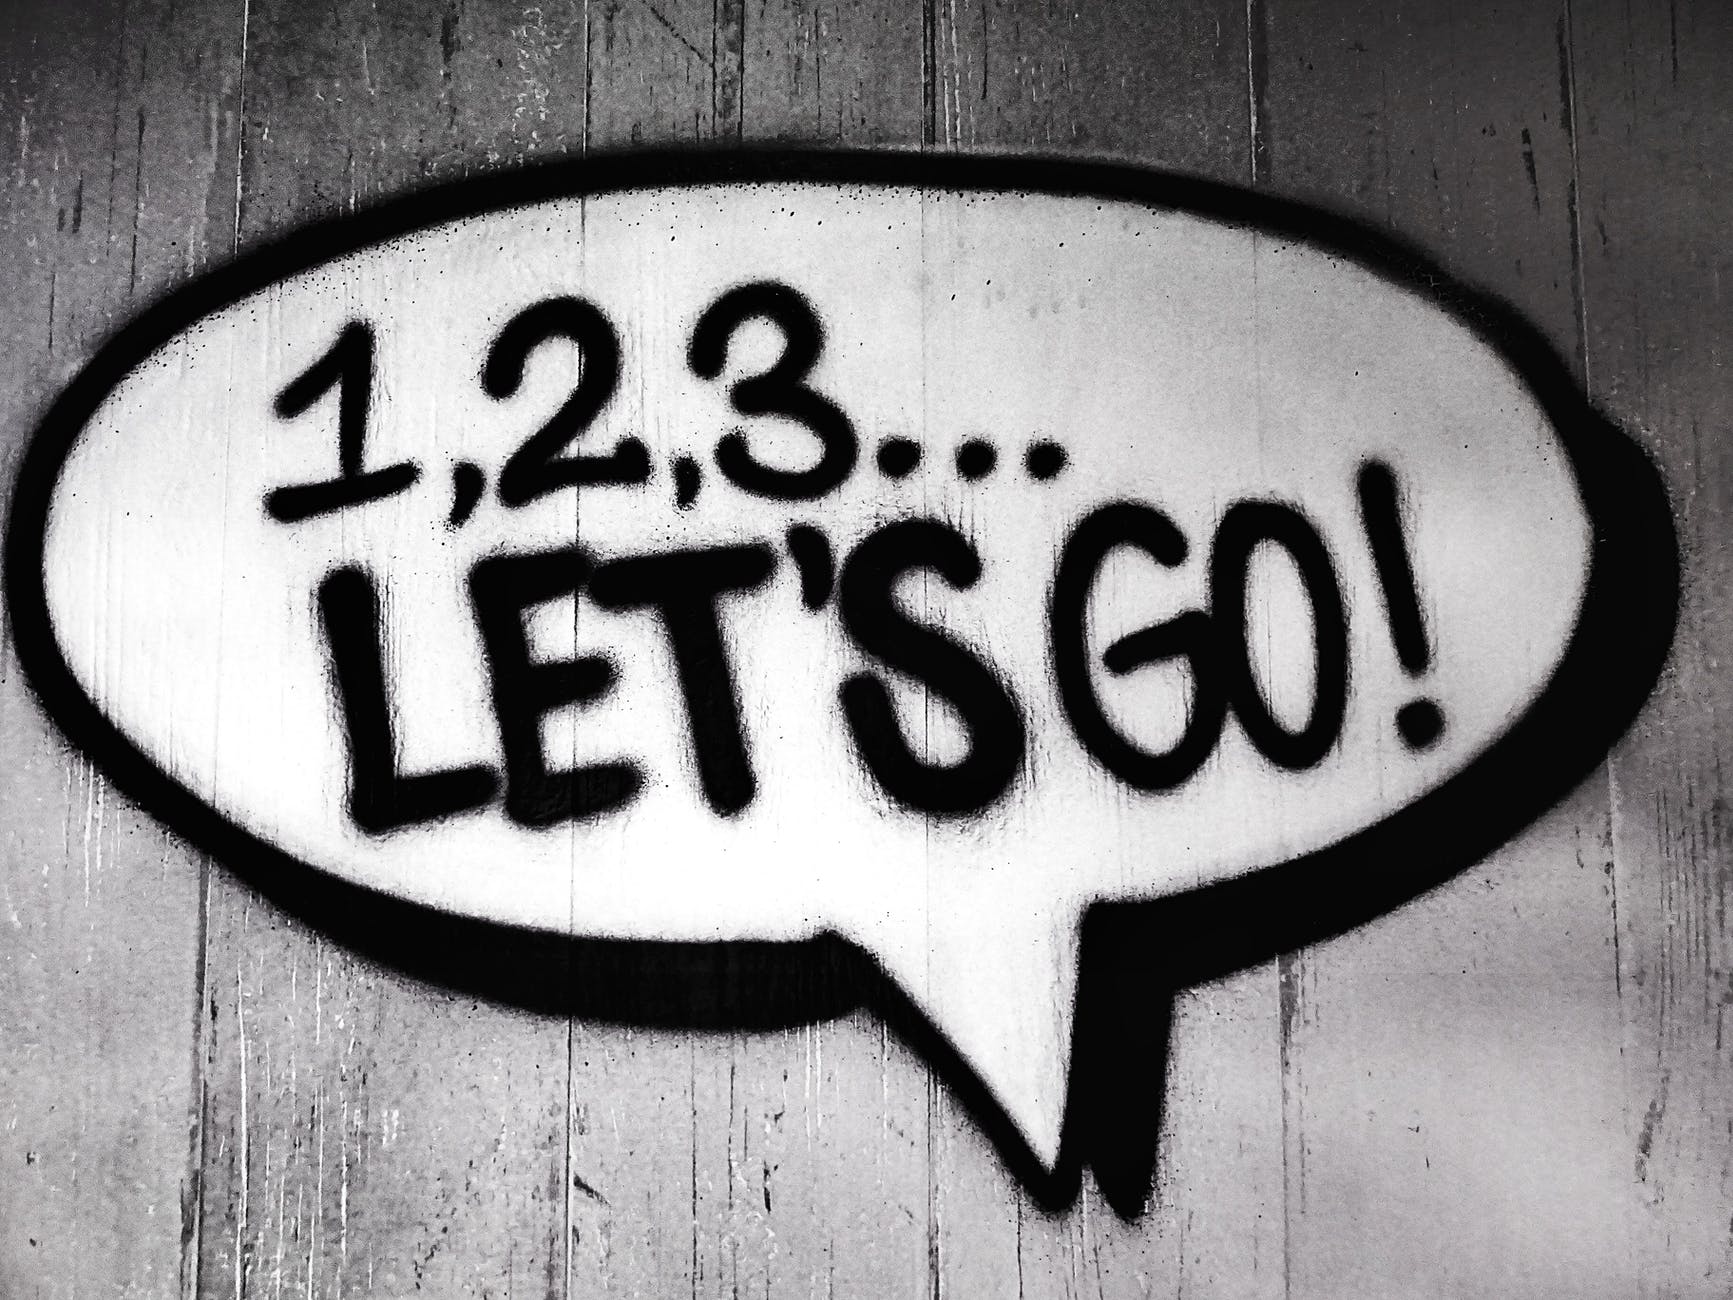 Speech bubble spray painted on a fence with '1 2, 3 let's go!' written inside it